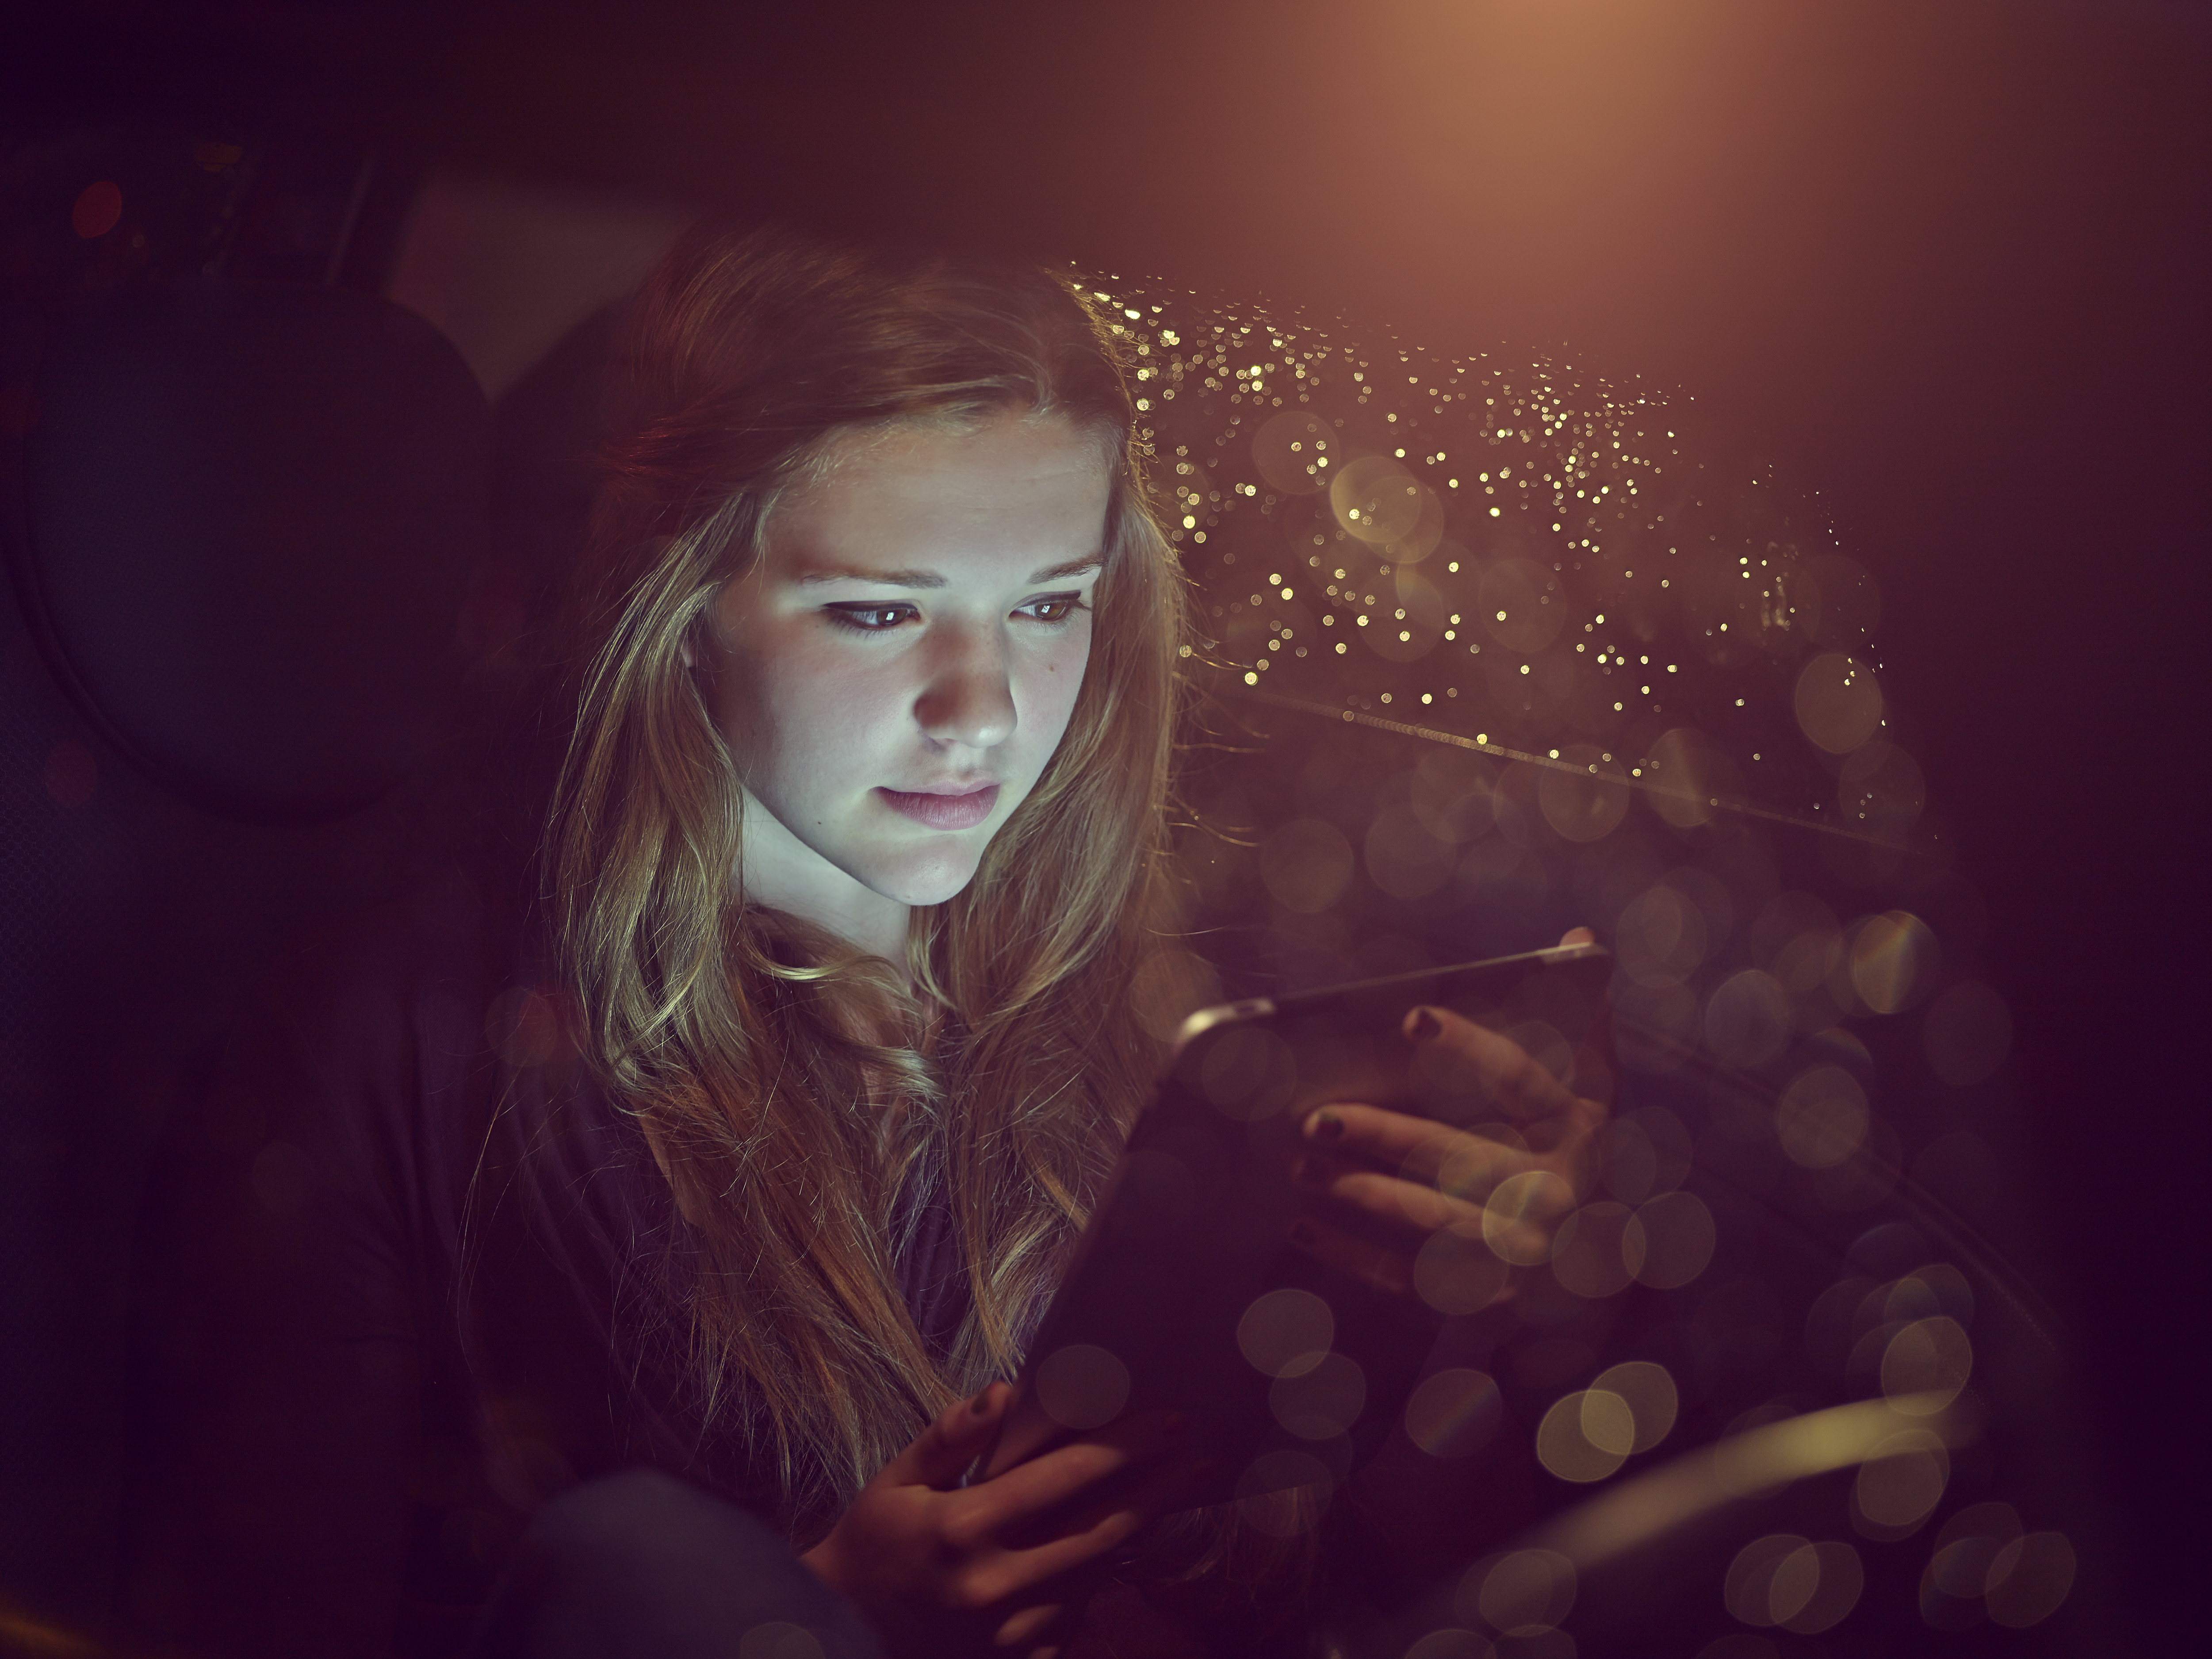 Teenage girl on an tablet computer in a car at night | Source: Getty Images